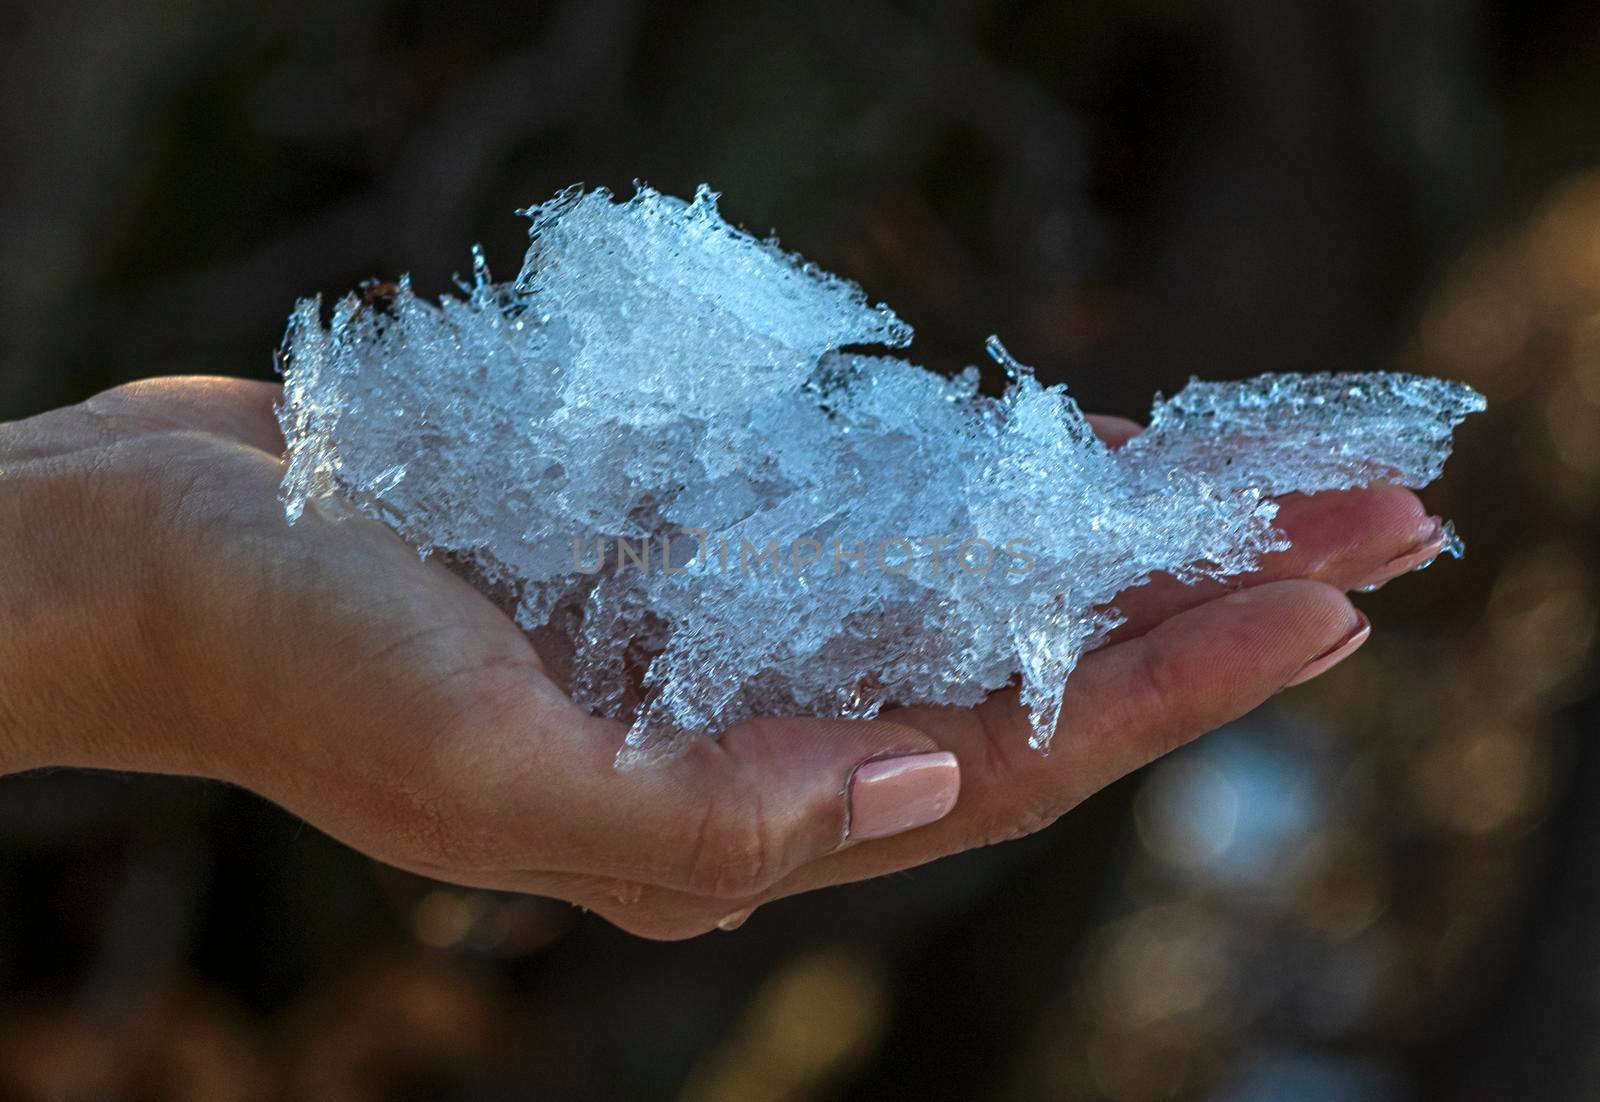 A hand full of ice on a blurred background